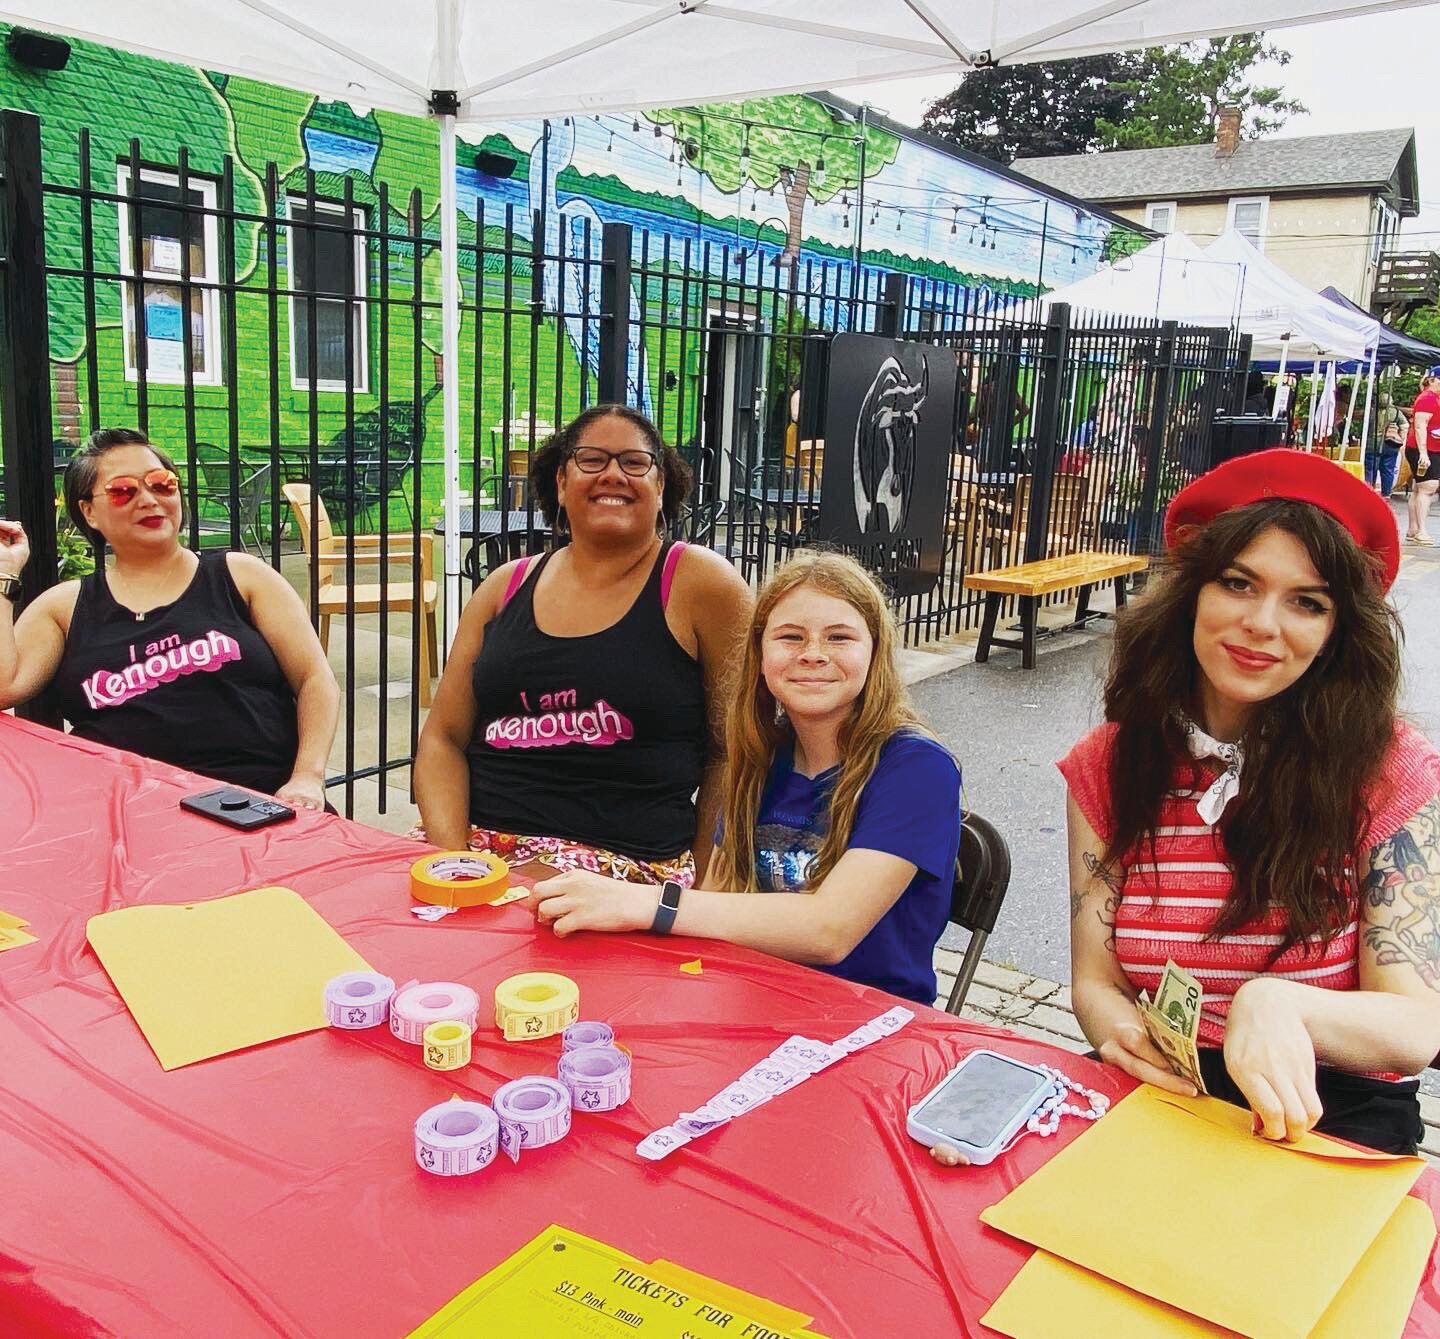 Amy Viken (volunteer), Holly Pinkerton (volunteer), Elsie Greeley (volunteer and my niece), and Janet Kolterman (server) sell tickets at the Bull's Horn parking lot party on Sunday, Aug. 6. On tap this year was Bull Brand, a collab with Venn Brewing.